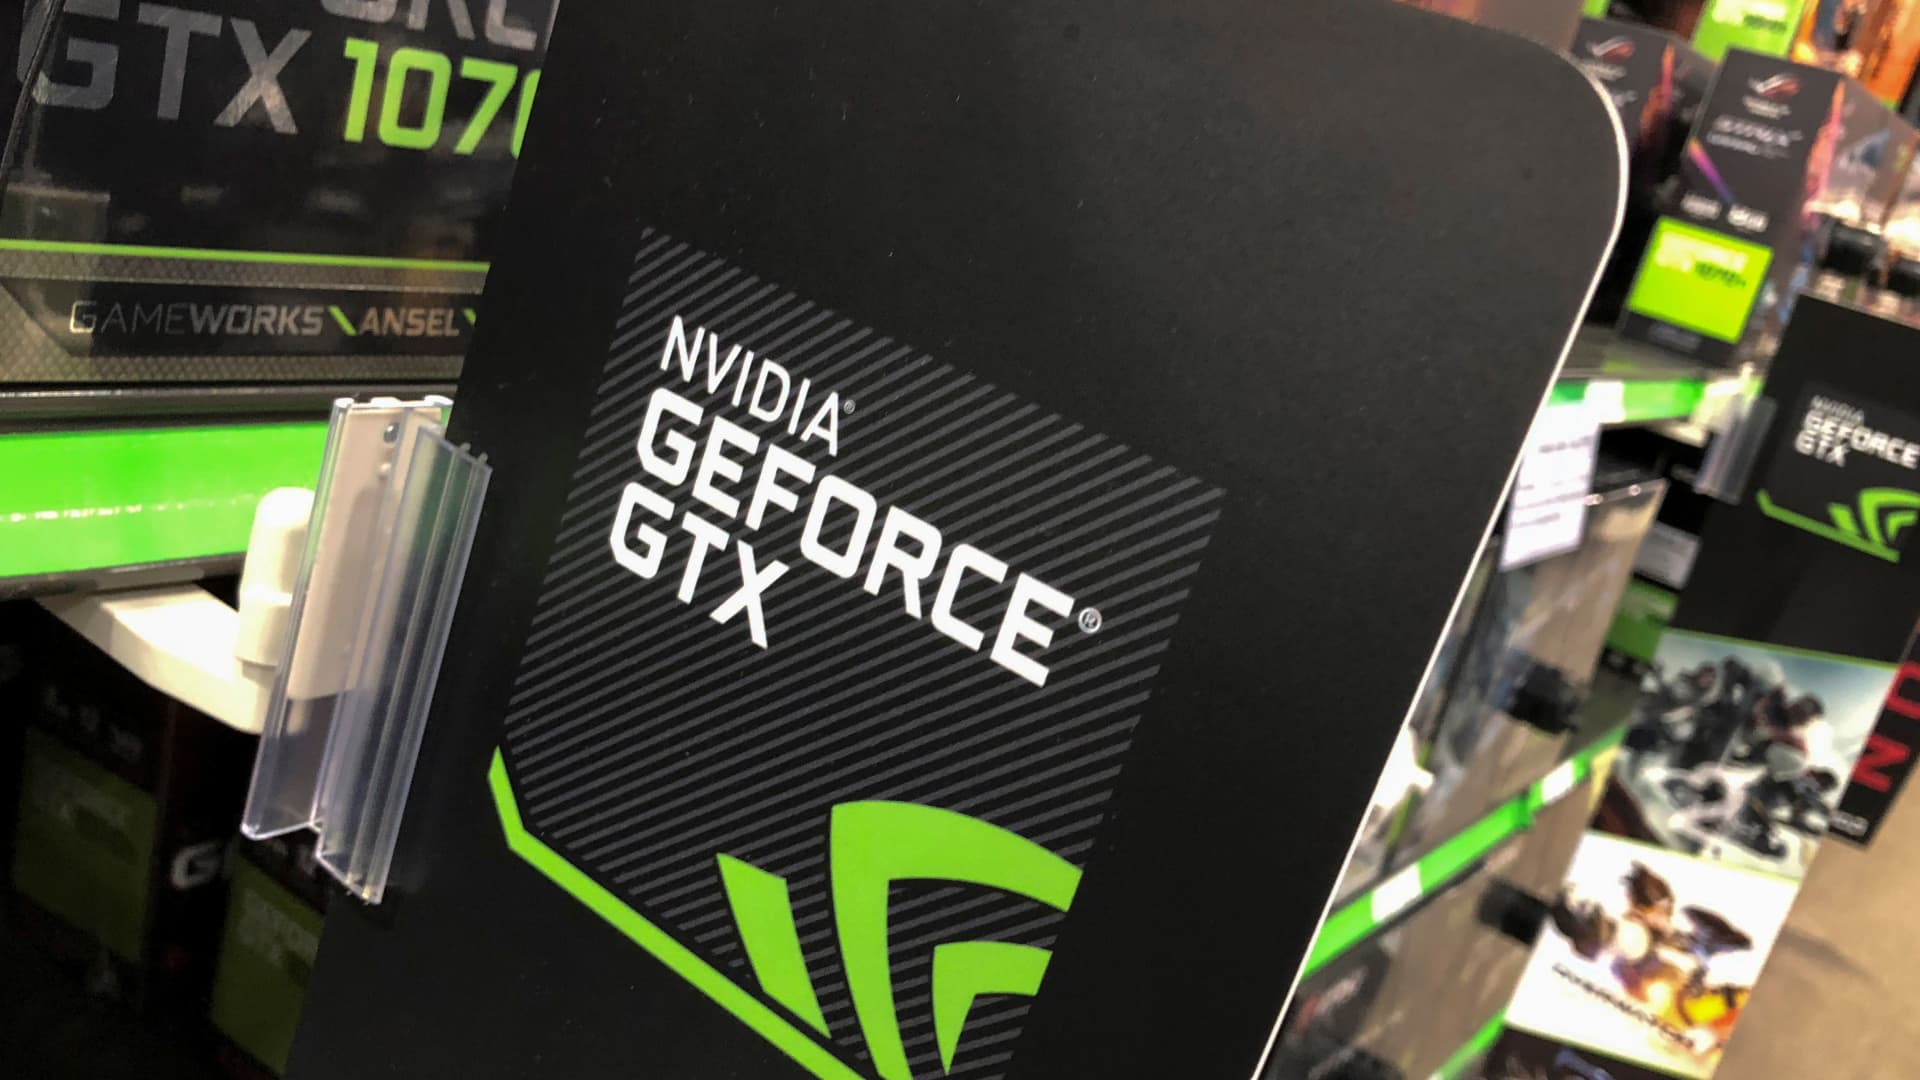 Here’s the trade on Nvidia ahead of earnings, according to analysts